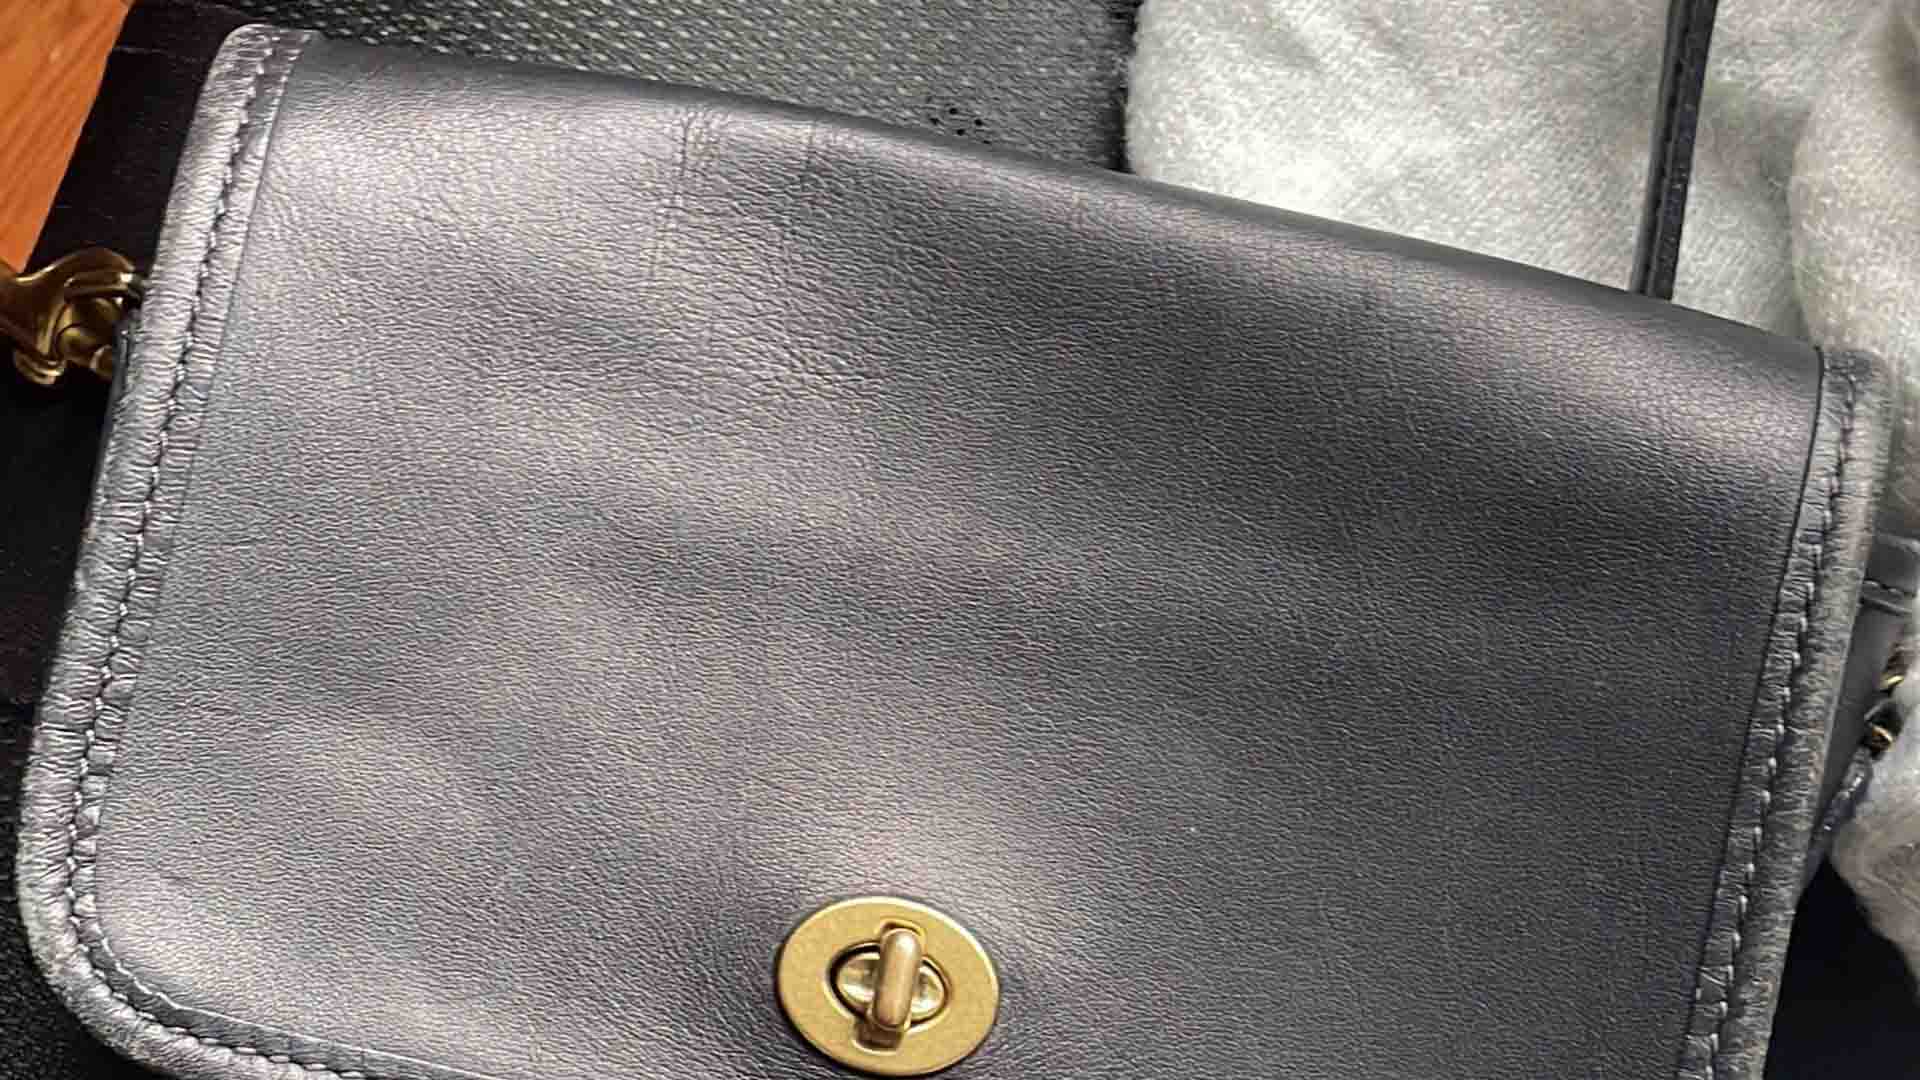 Redditor reveals how they found a vintage Coach bag for cheap